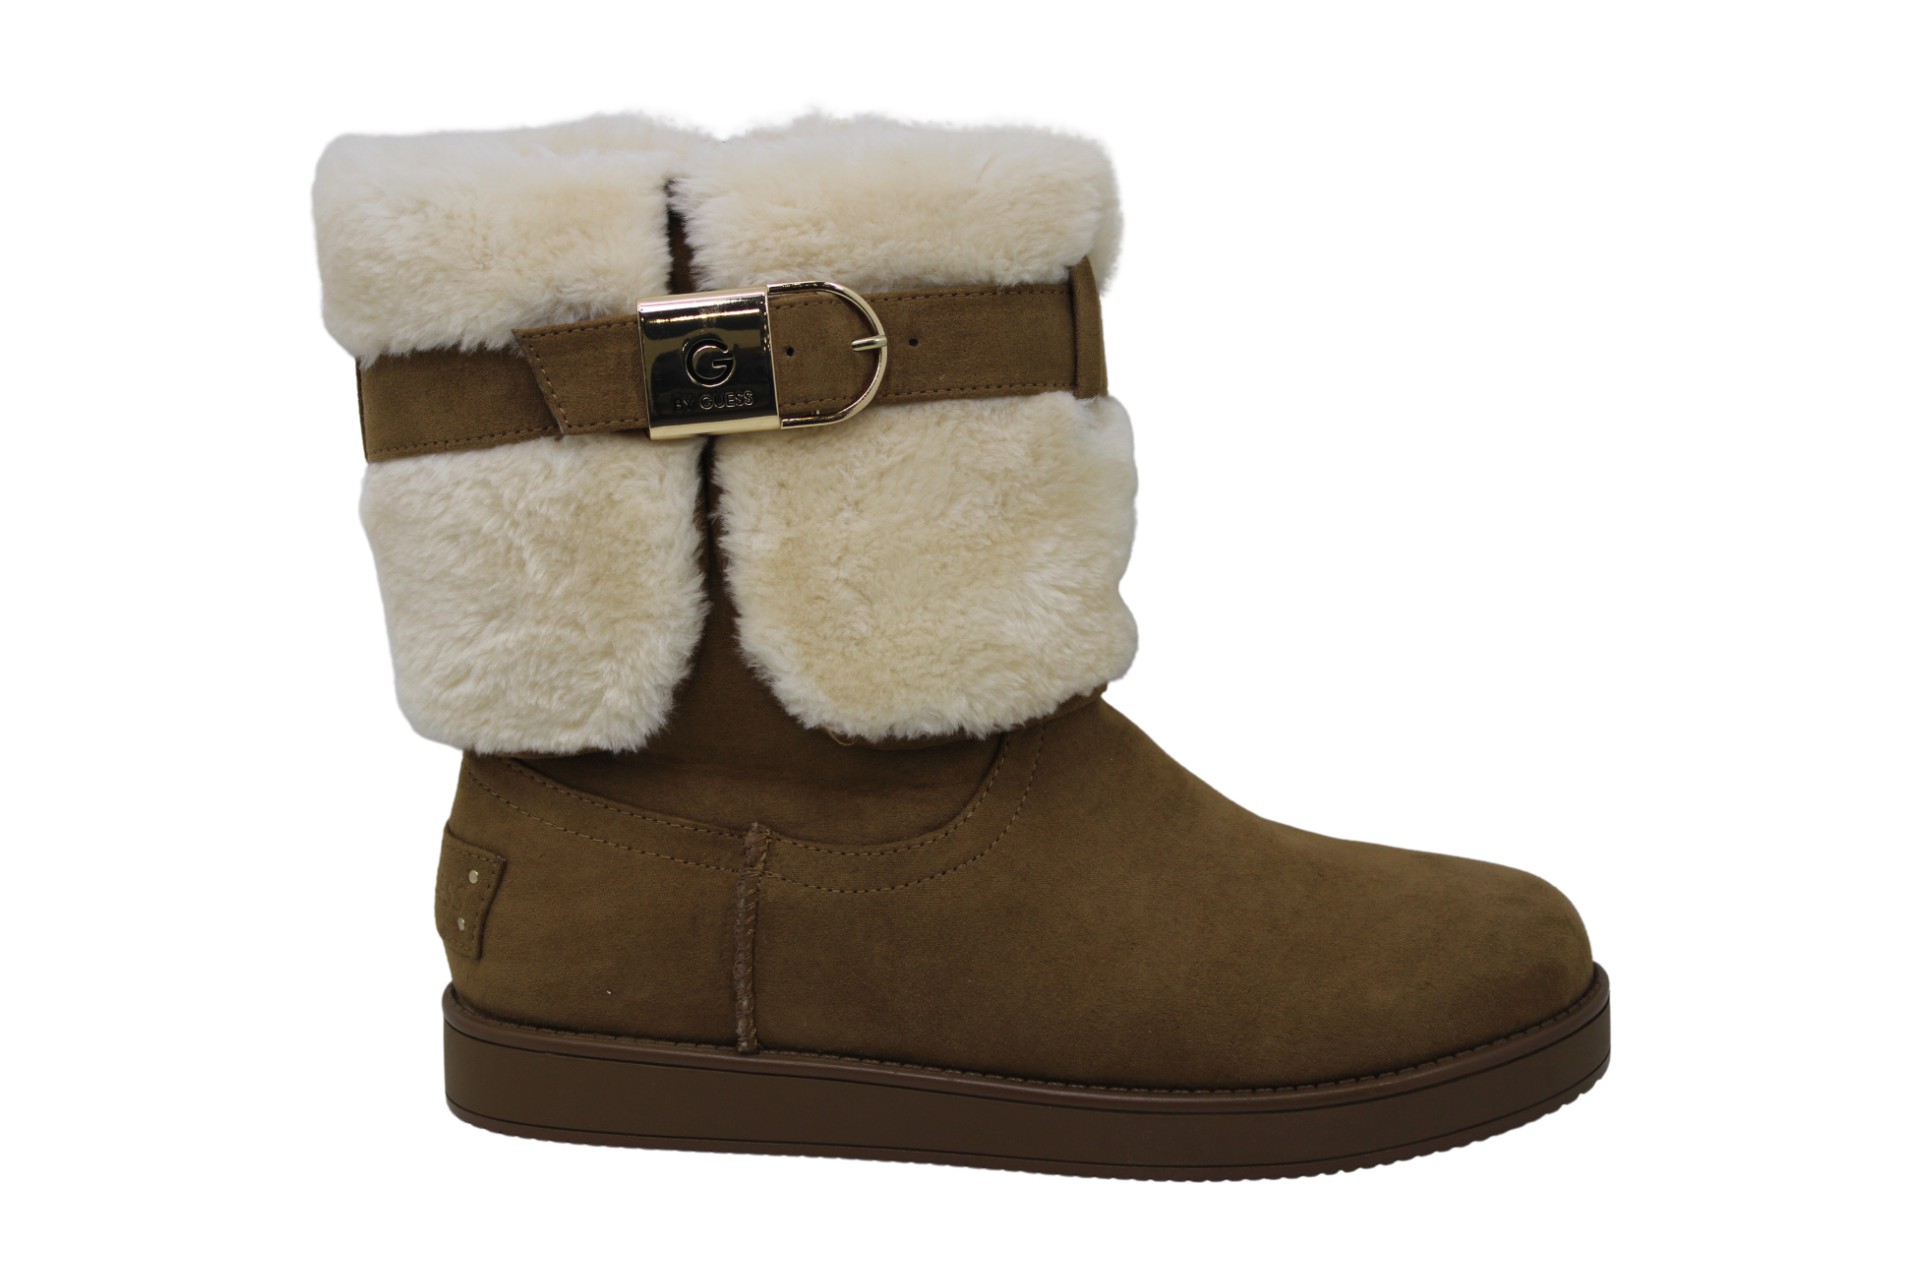 G by Guess Women's Addalyn Faux Fur Round Toe Ankle Fashion, Brown ...